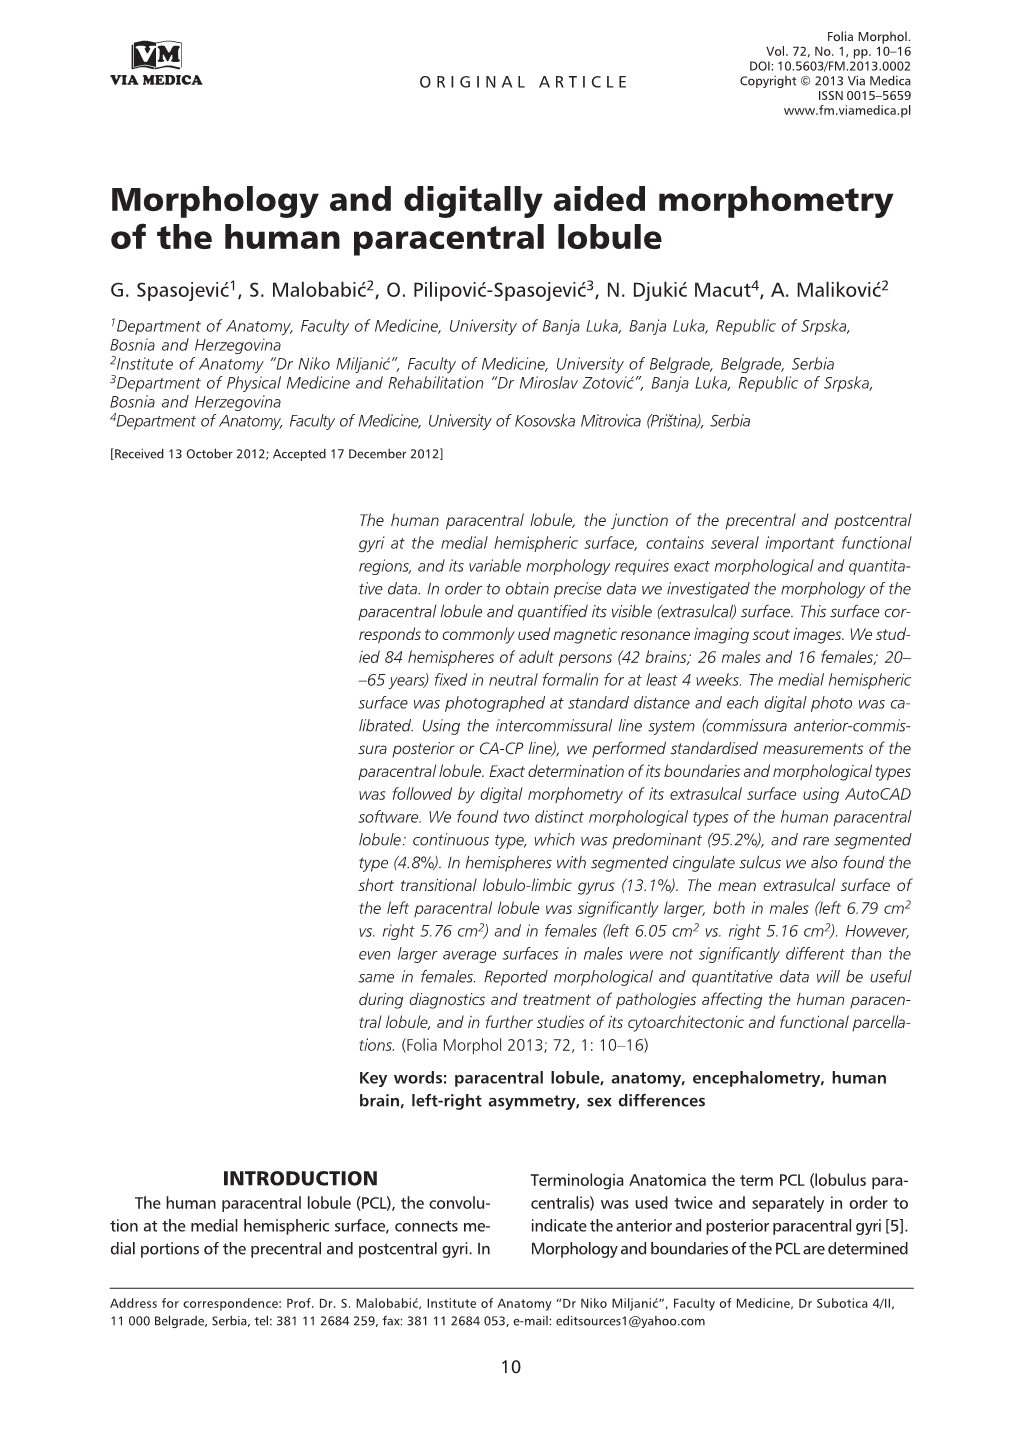 Morphology and Digitally Aided Morphometry of the Human Paracentral Lobule